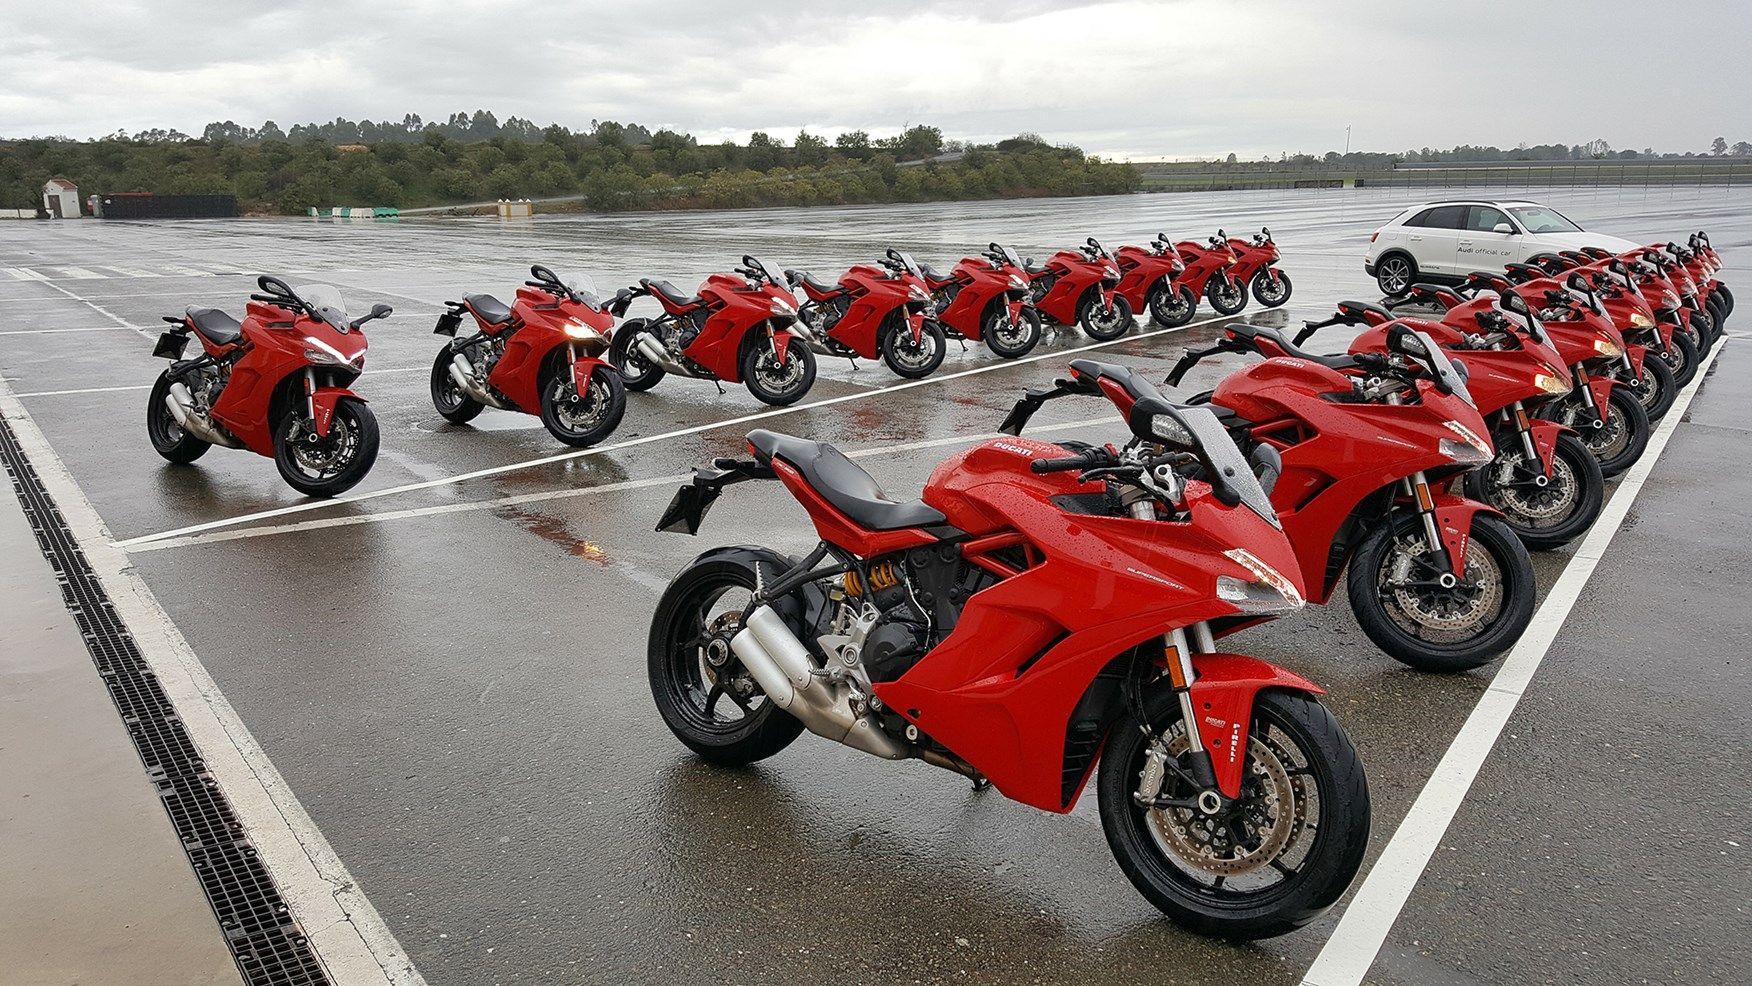 ➡➡Ducati SuperSport Image, Picture & Wallpaper Download